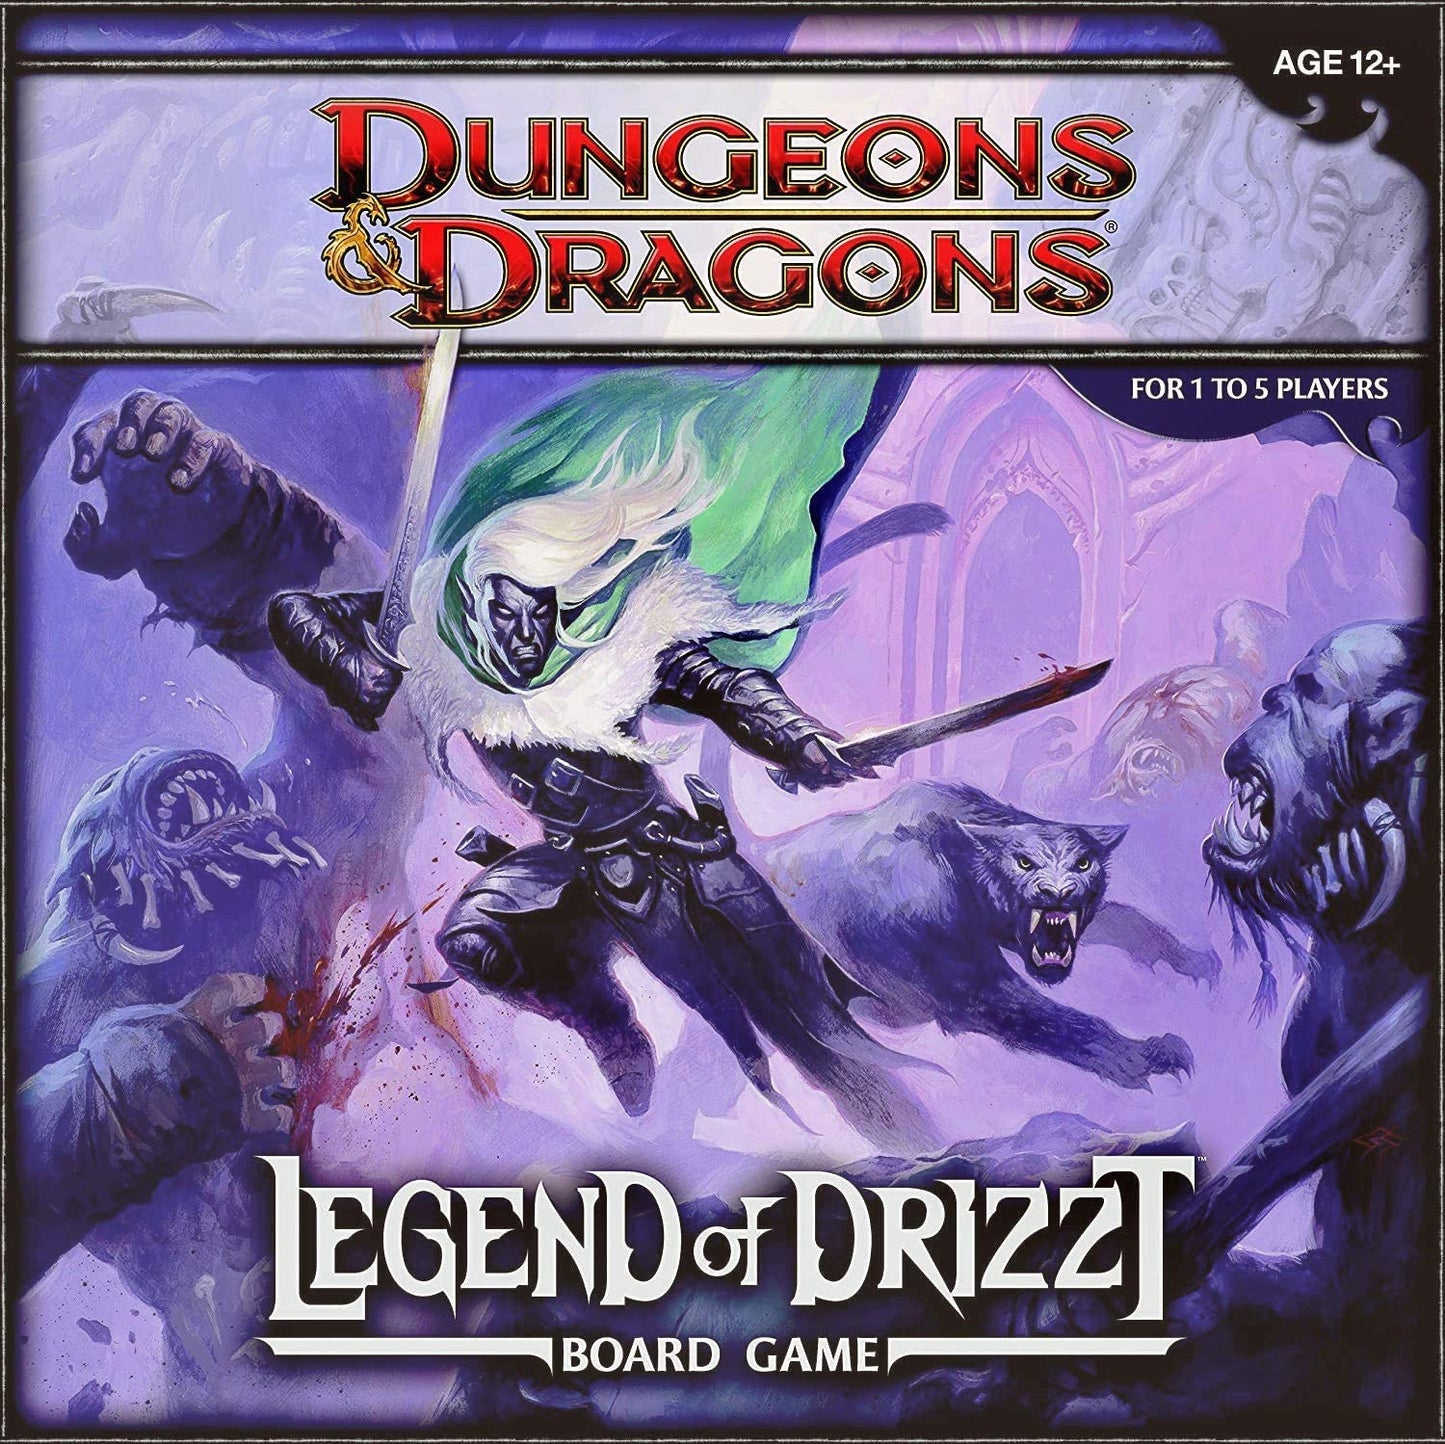 (BSG Certified USED) Legend of Drizzt